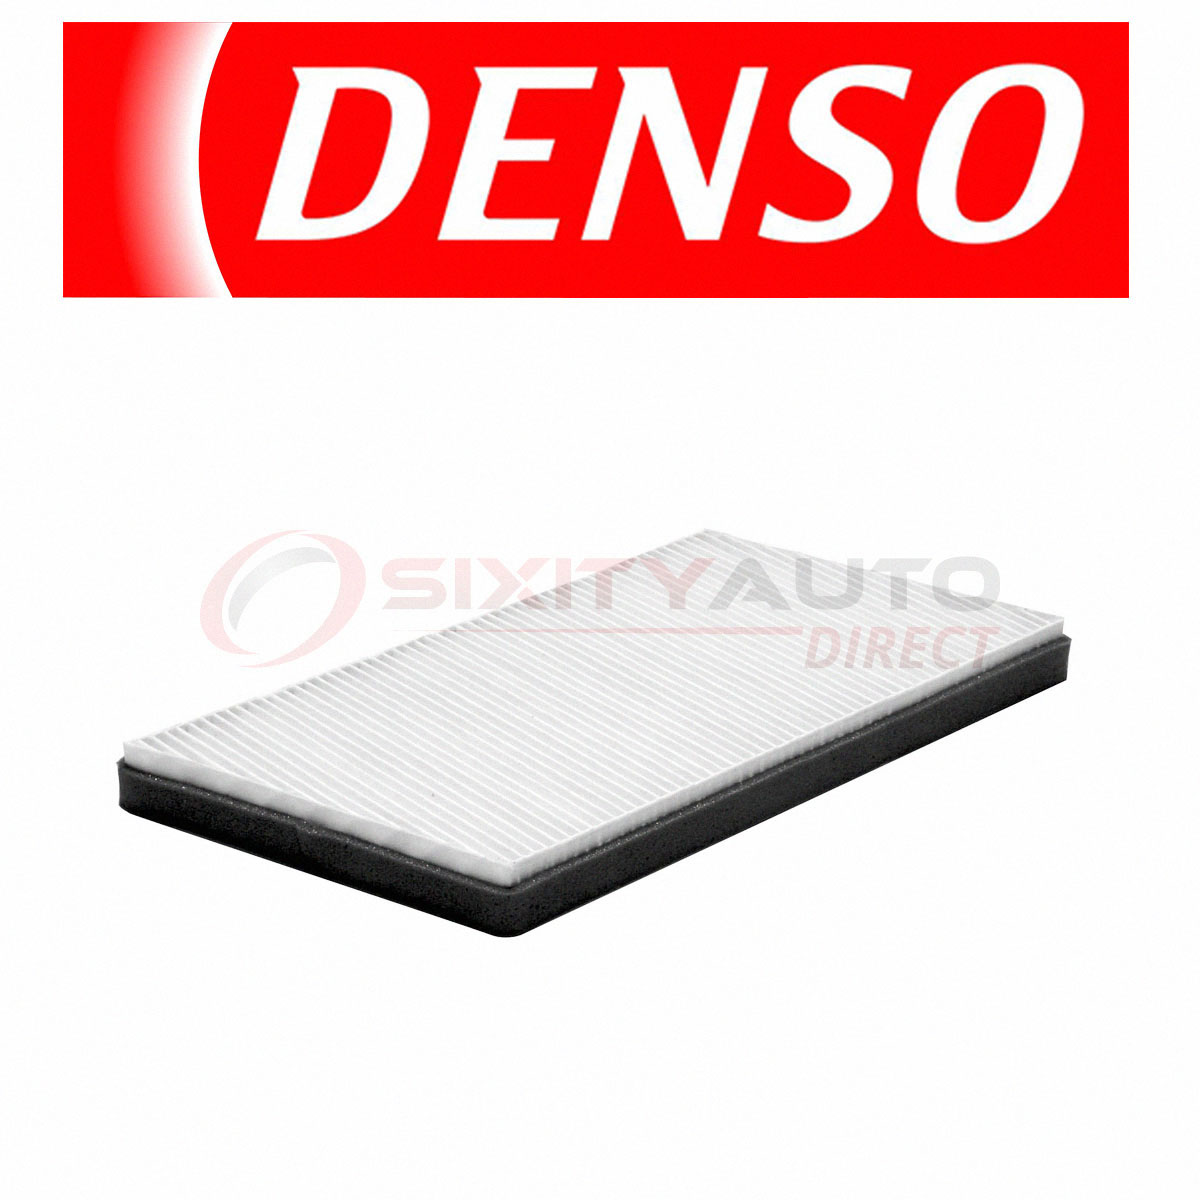 Denso Cabin Air Filter for Lincoln Continental 4.6L V8 1998-2002 HVAC nw | eBay 2001 Lincoln Town Car Cabin Air Filter